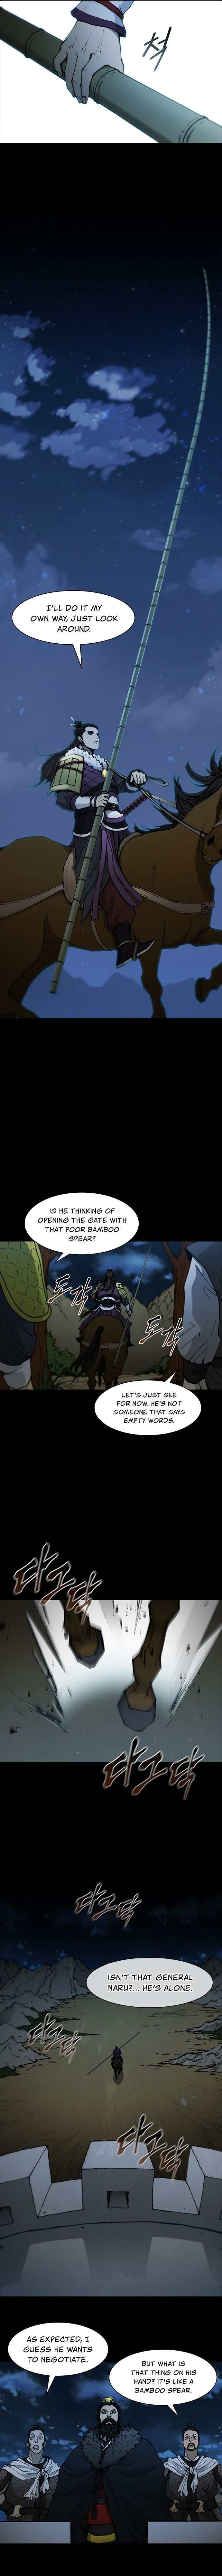 The Long Way of the Warrior Chapter 53 page 5